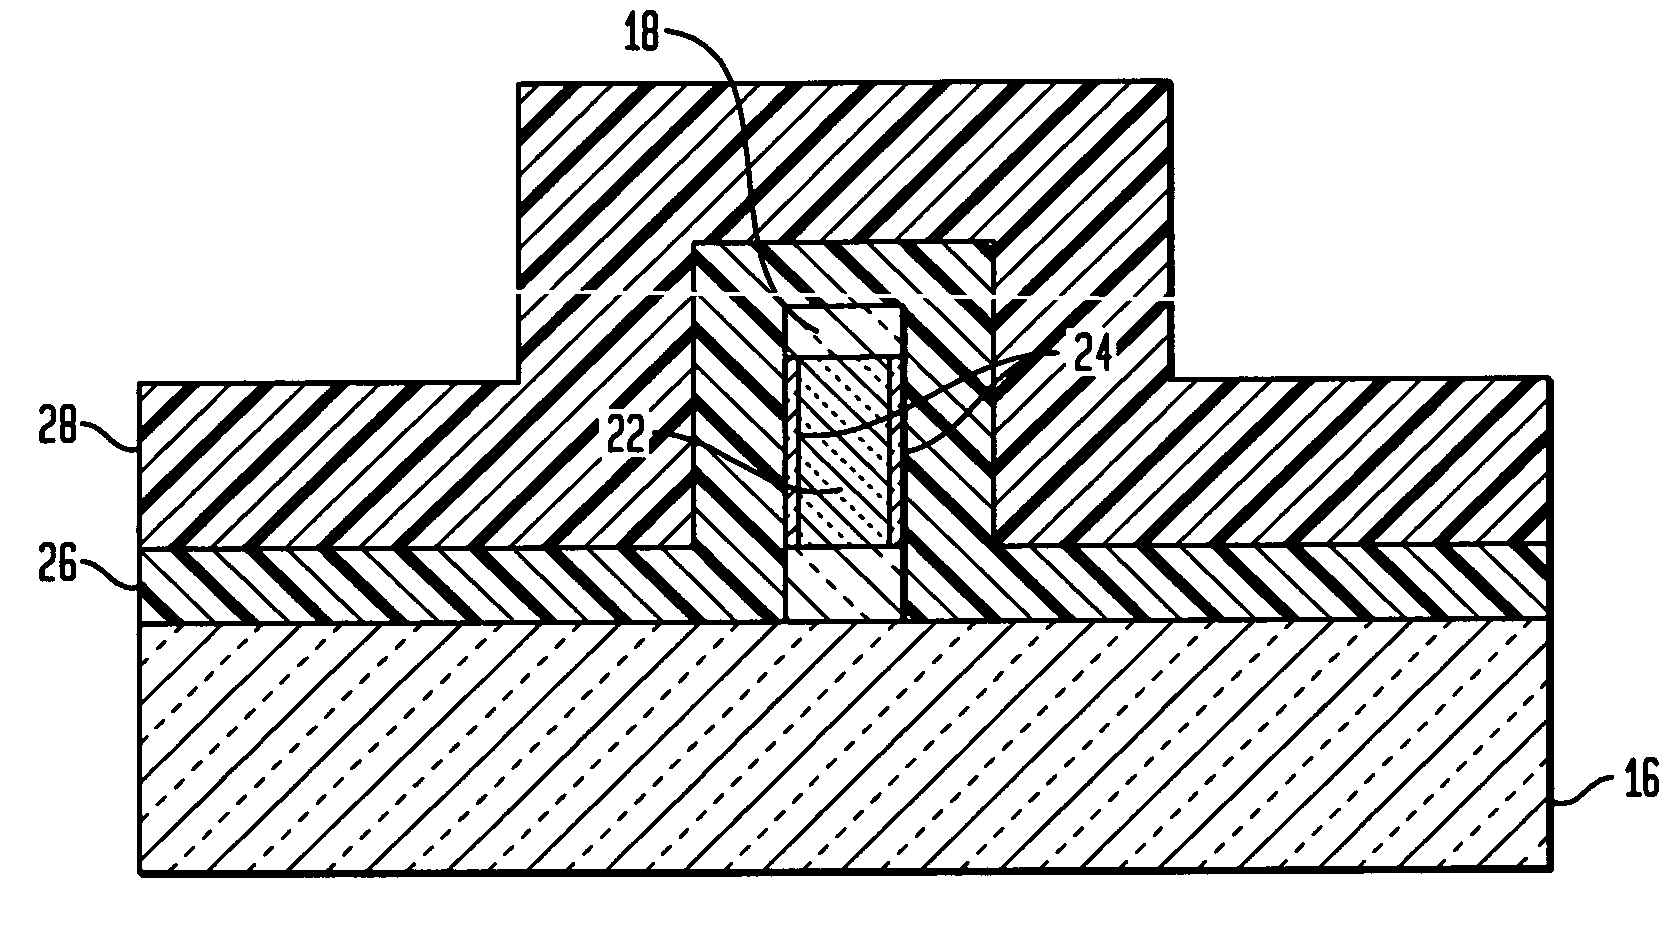 Structure and method for manufacturing strained finfet